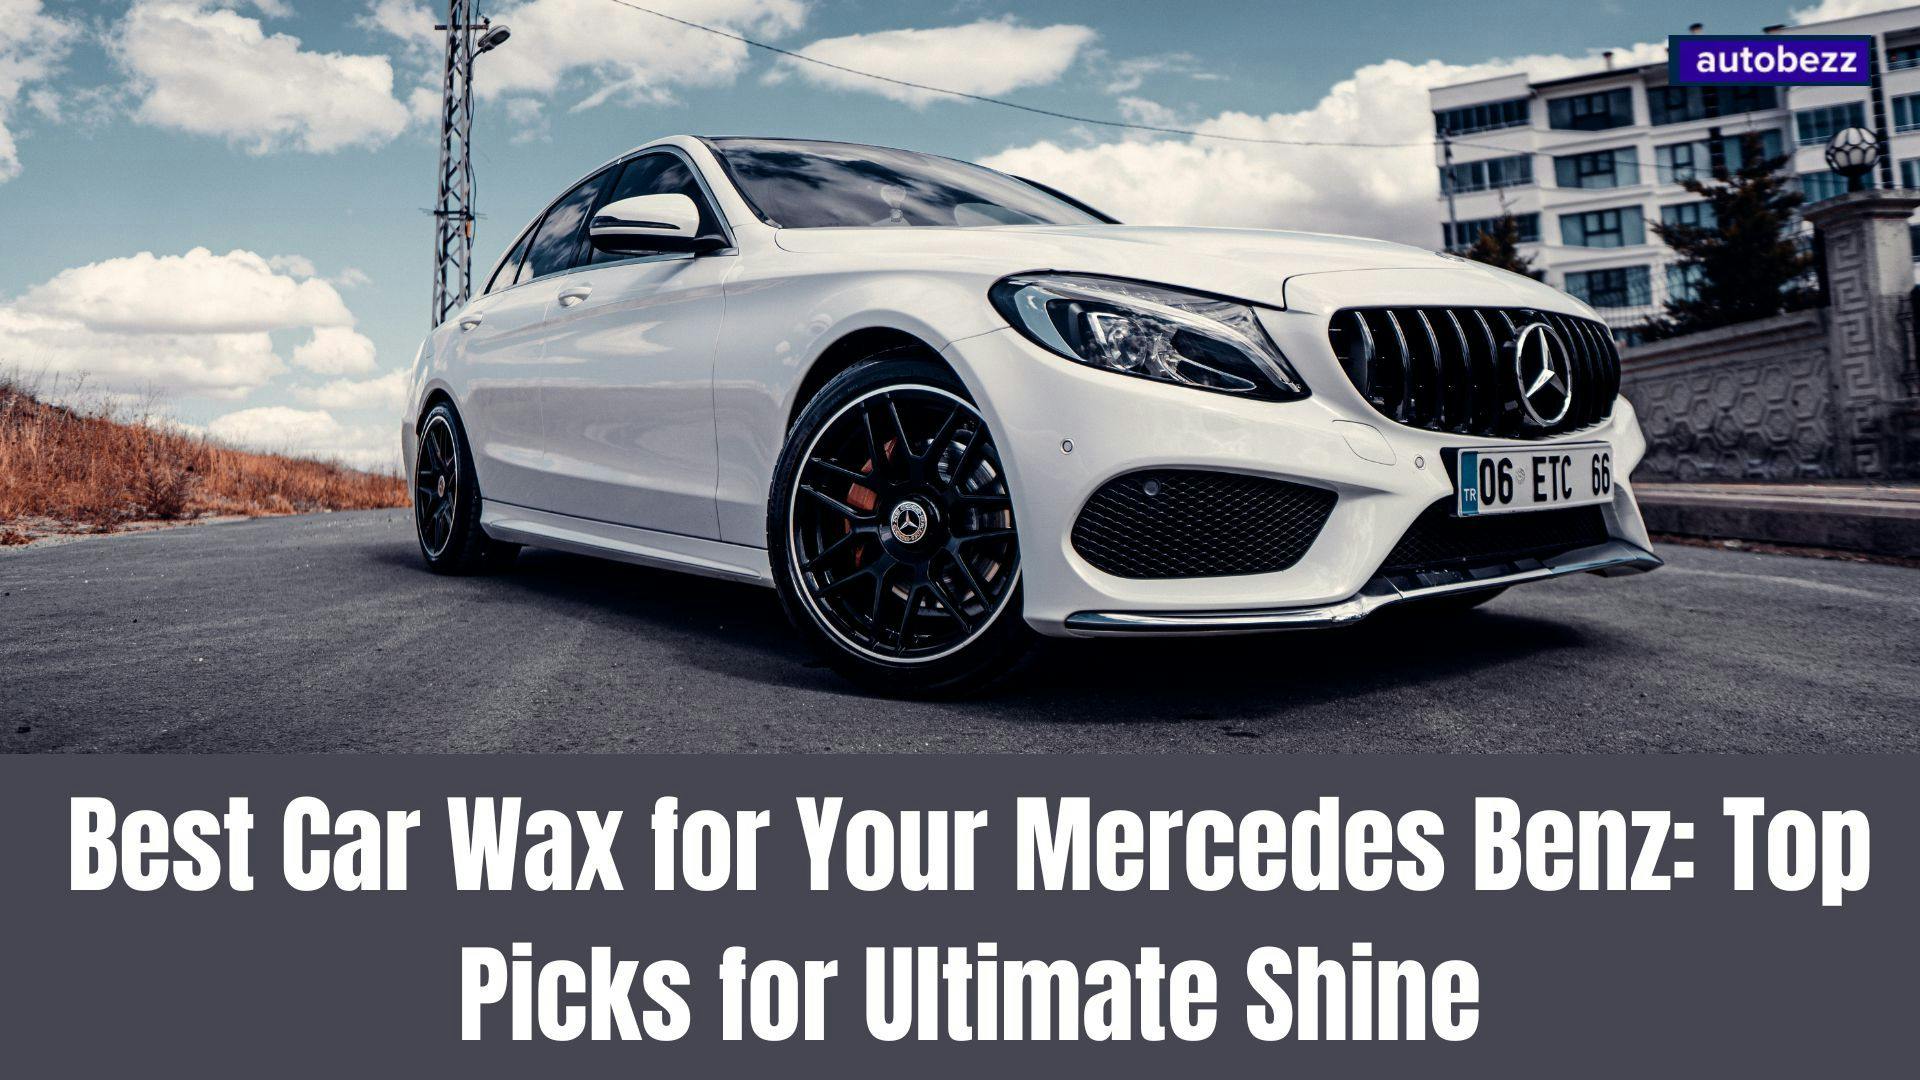 Best Car Wax for Your Mercedes Benz: Top Picks for Ultimate Shine